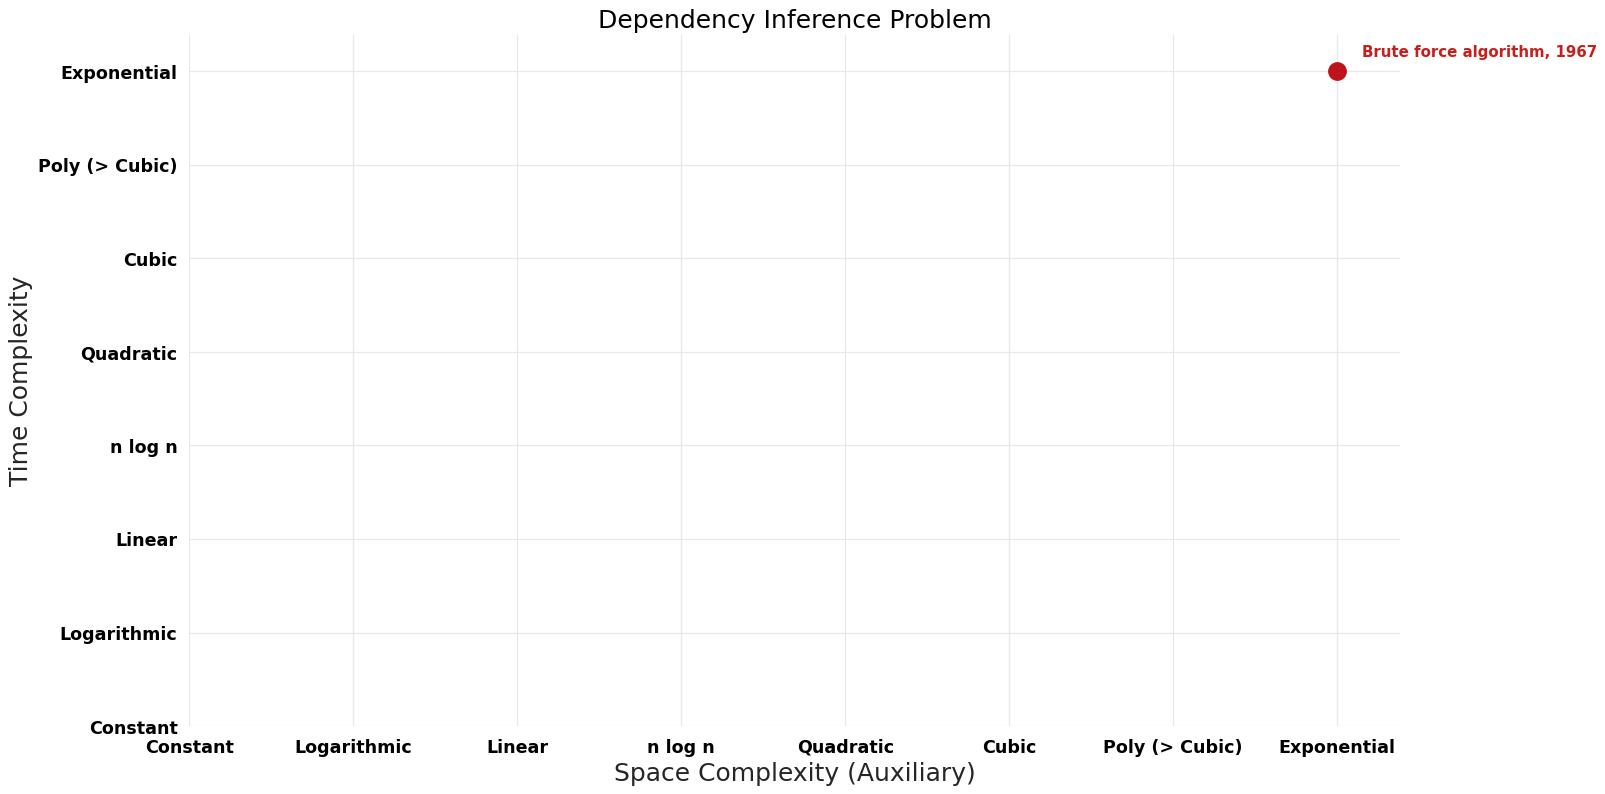 Dependency Inference Problem - Pareto Frontier.png